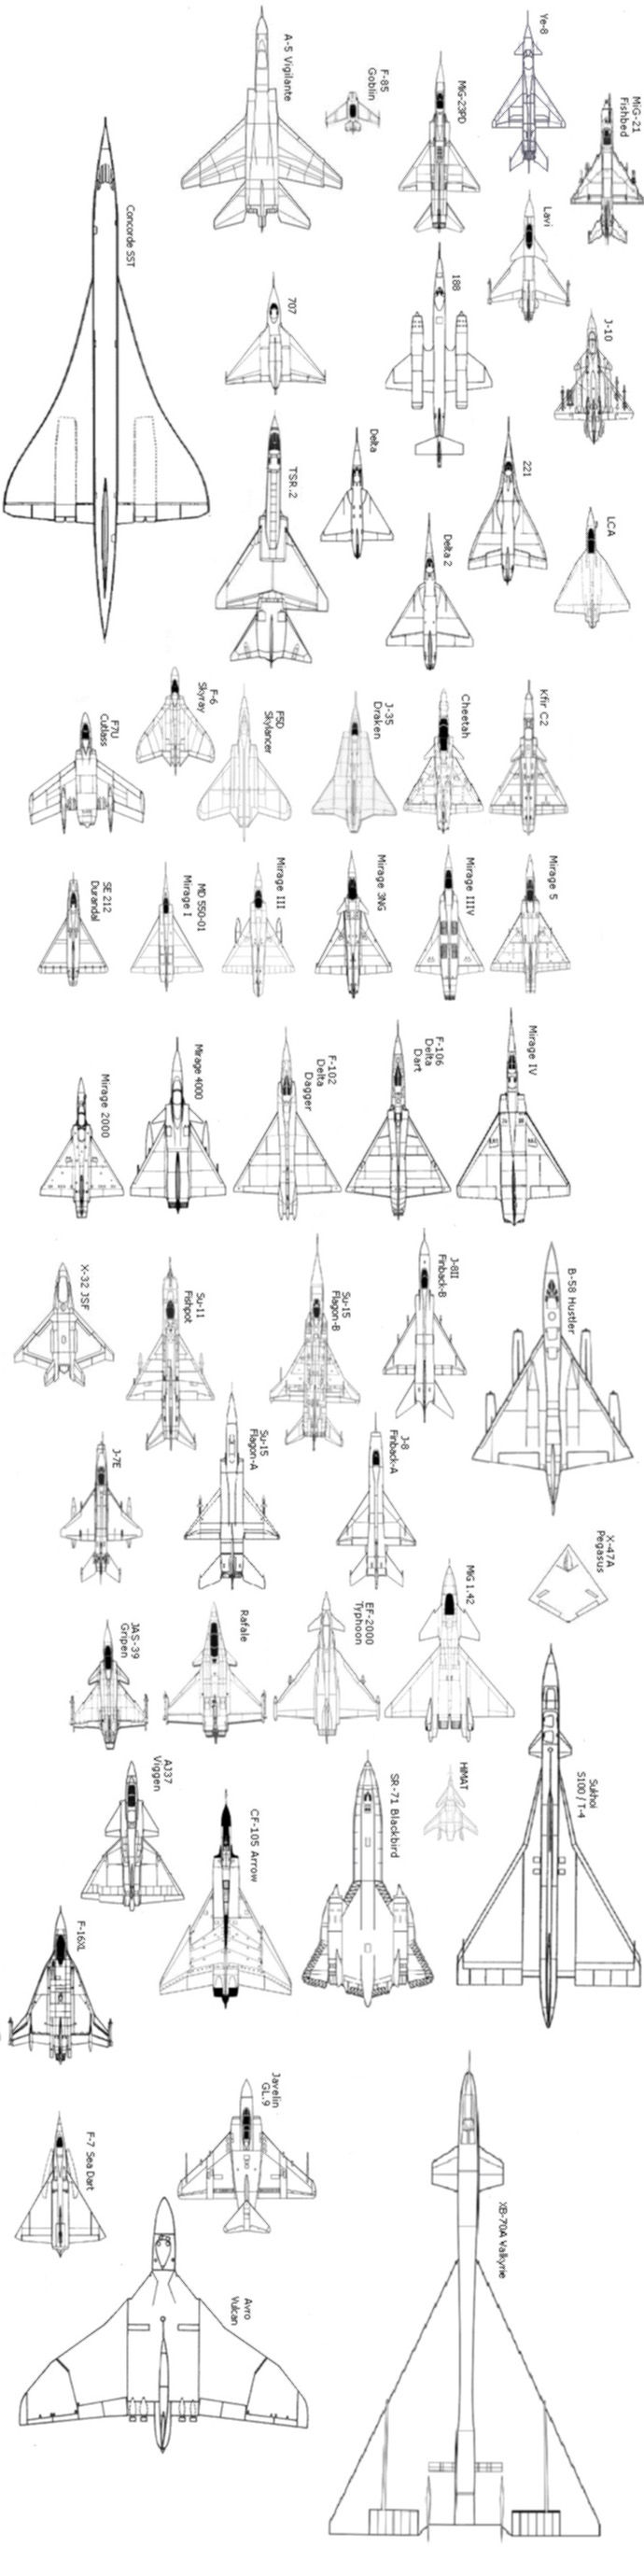 The delta wing and its variants